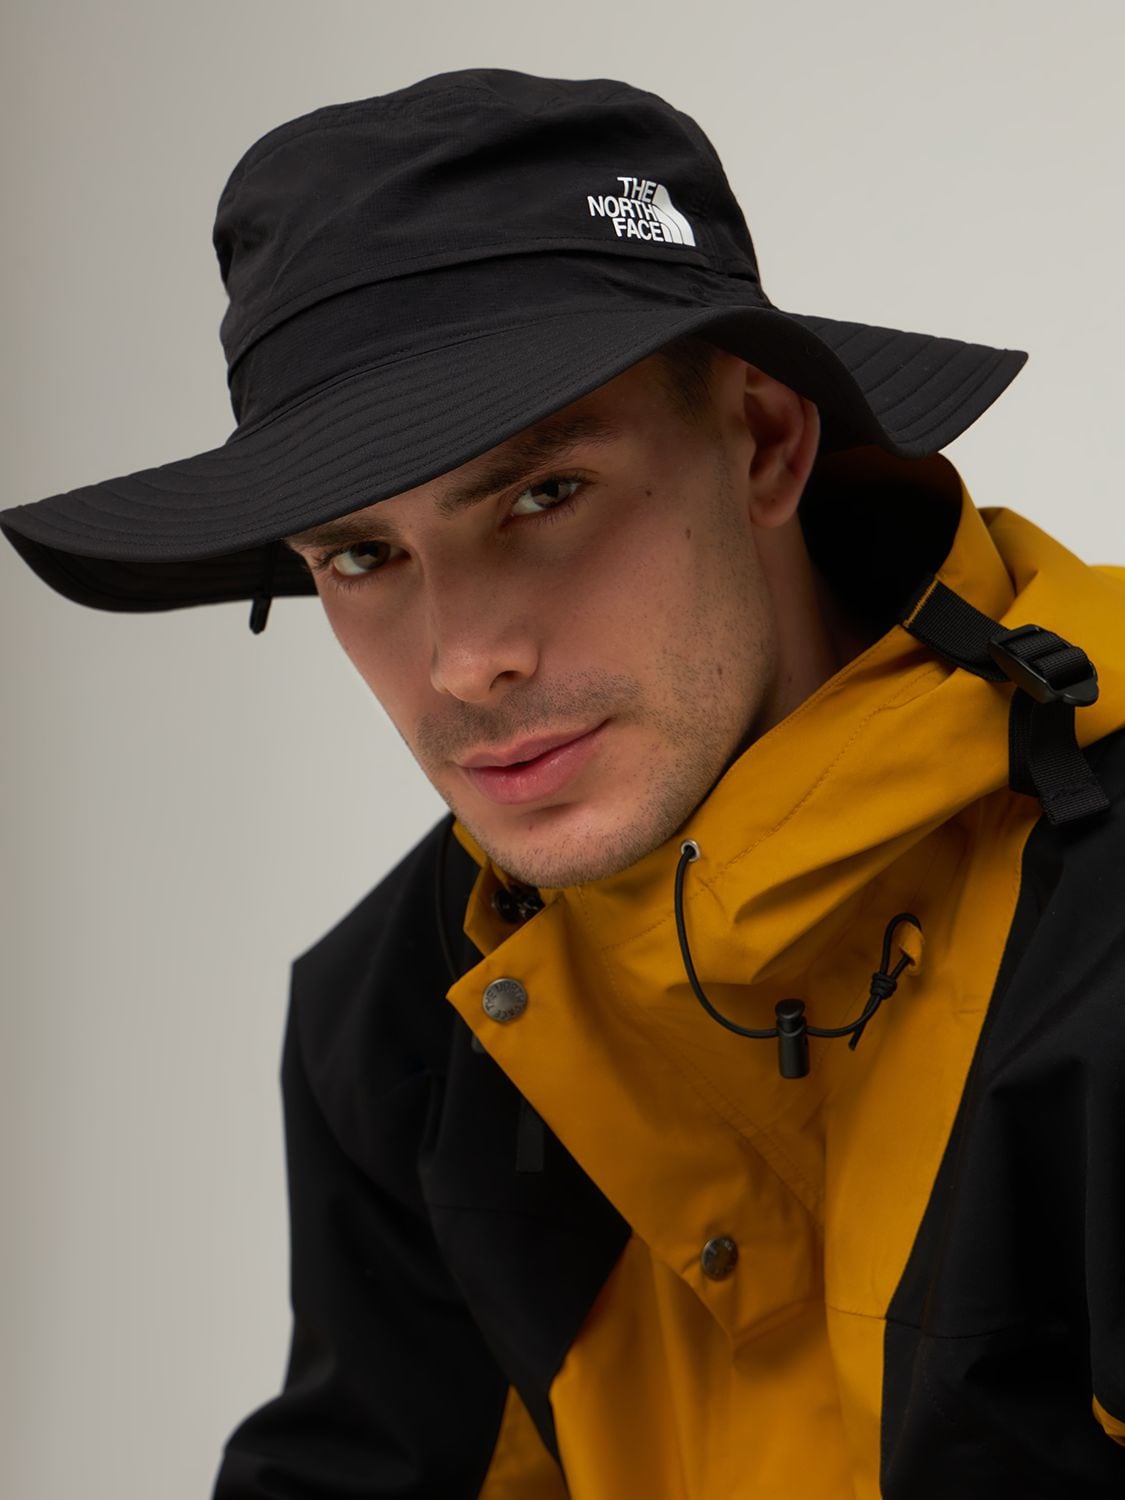 THE NORTH FACE Recycled Tech Horizon Breeze Hat